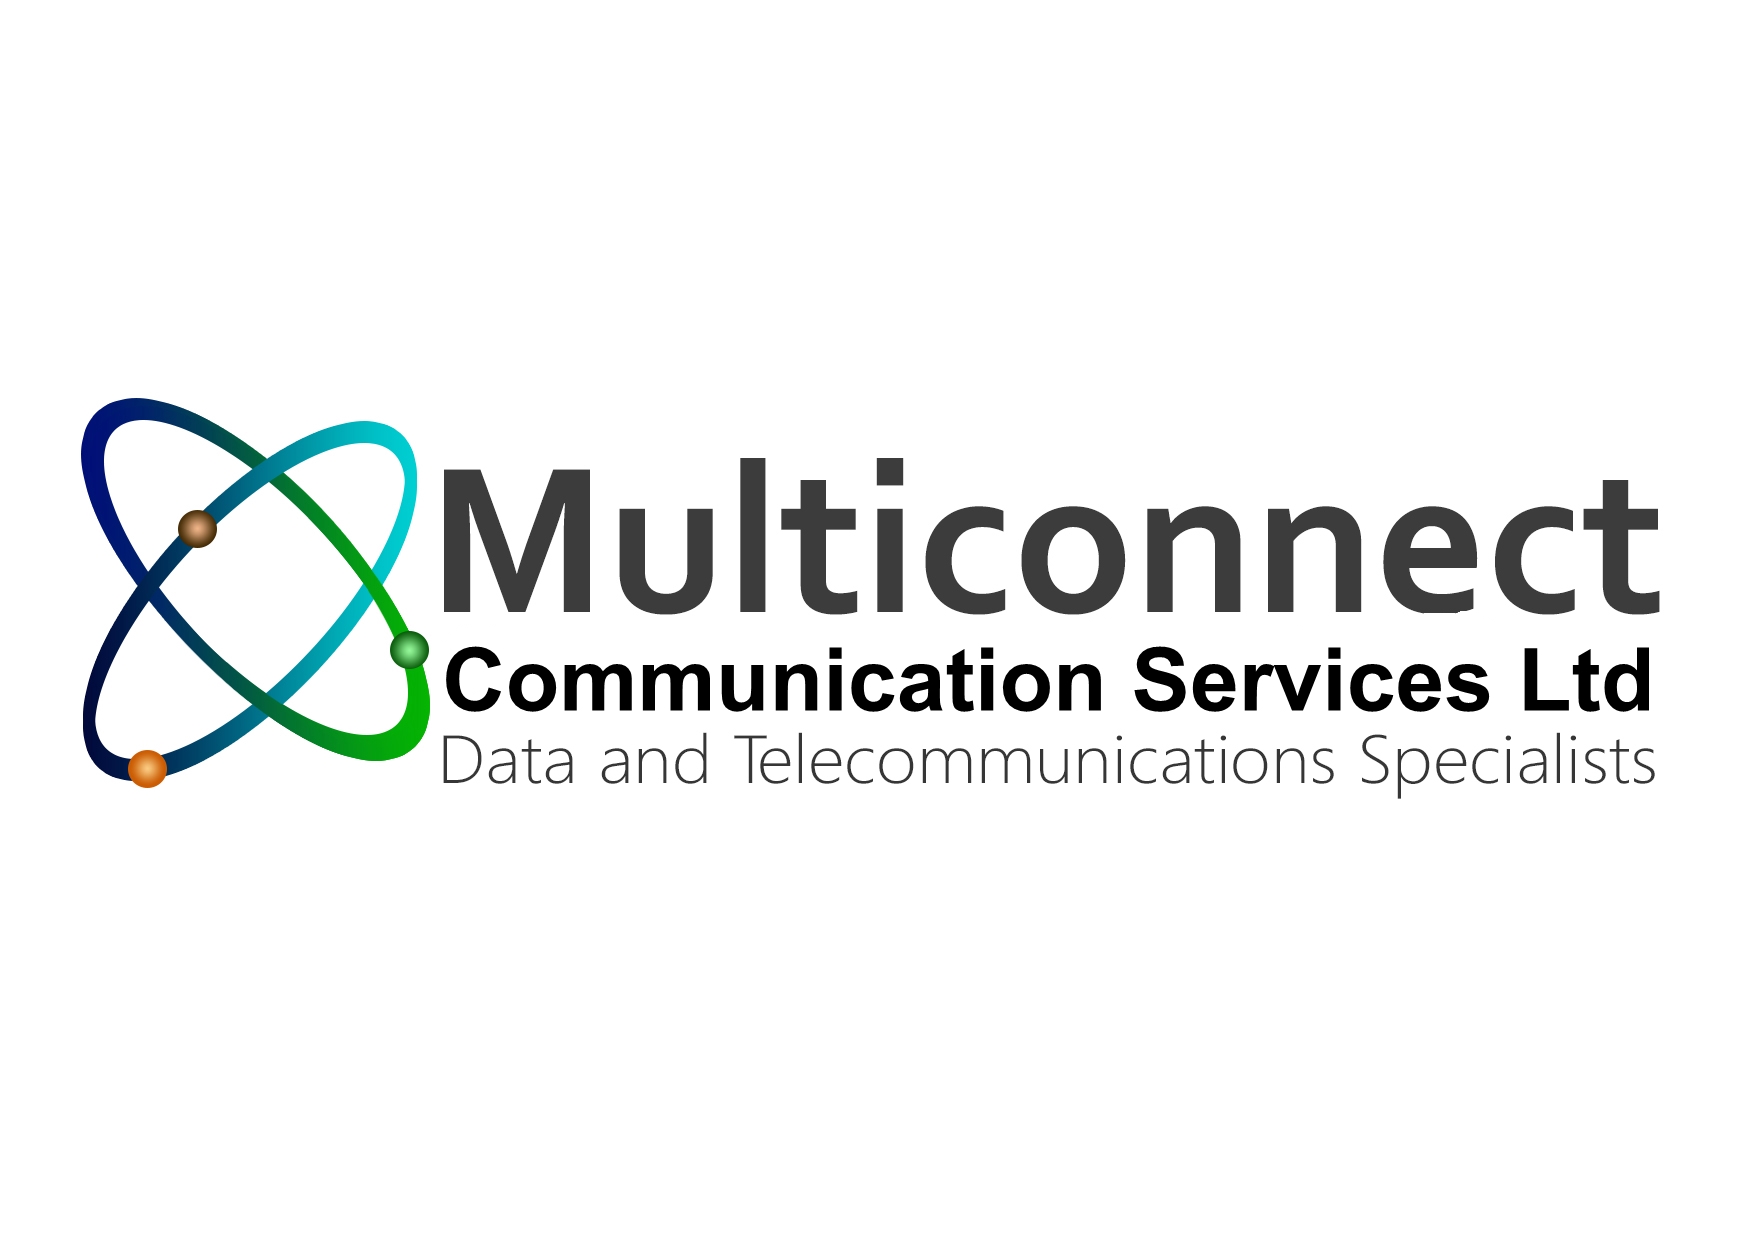 Multiconnect Communication Services renew sponsorship deal for 2 more years